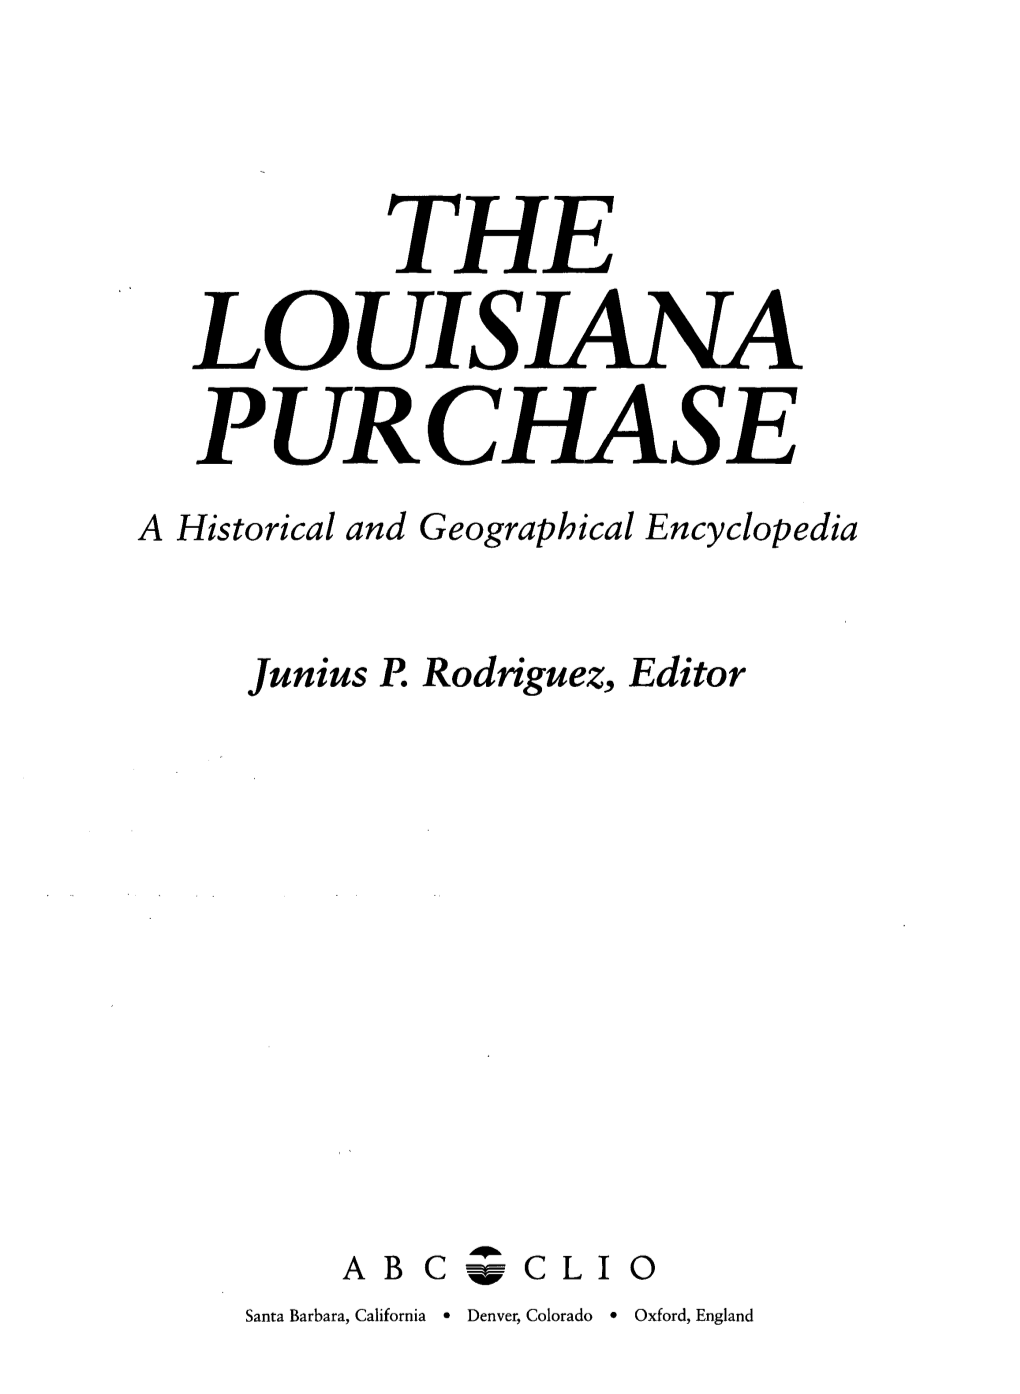 THE LOUISIANA PURCHASE a Historical and Geographical Encyclopedia